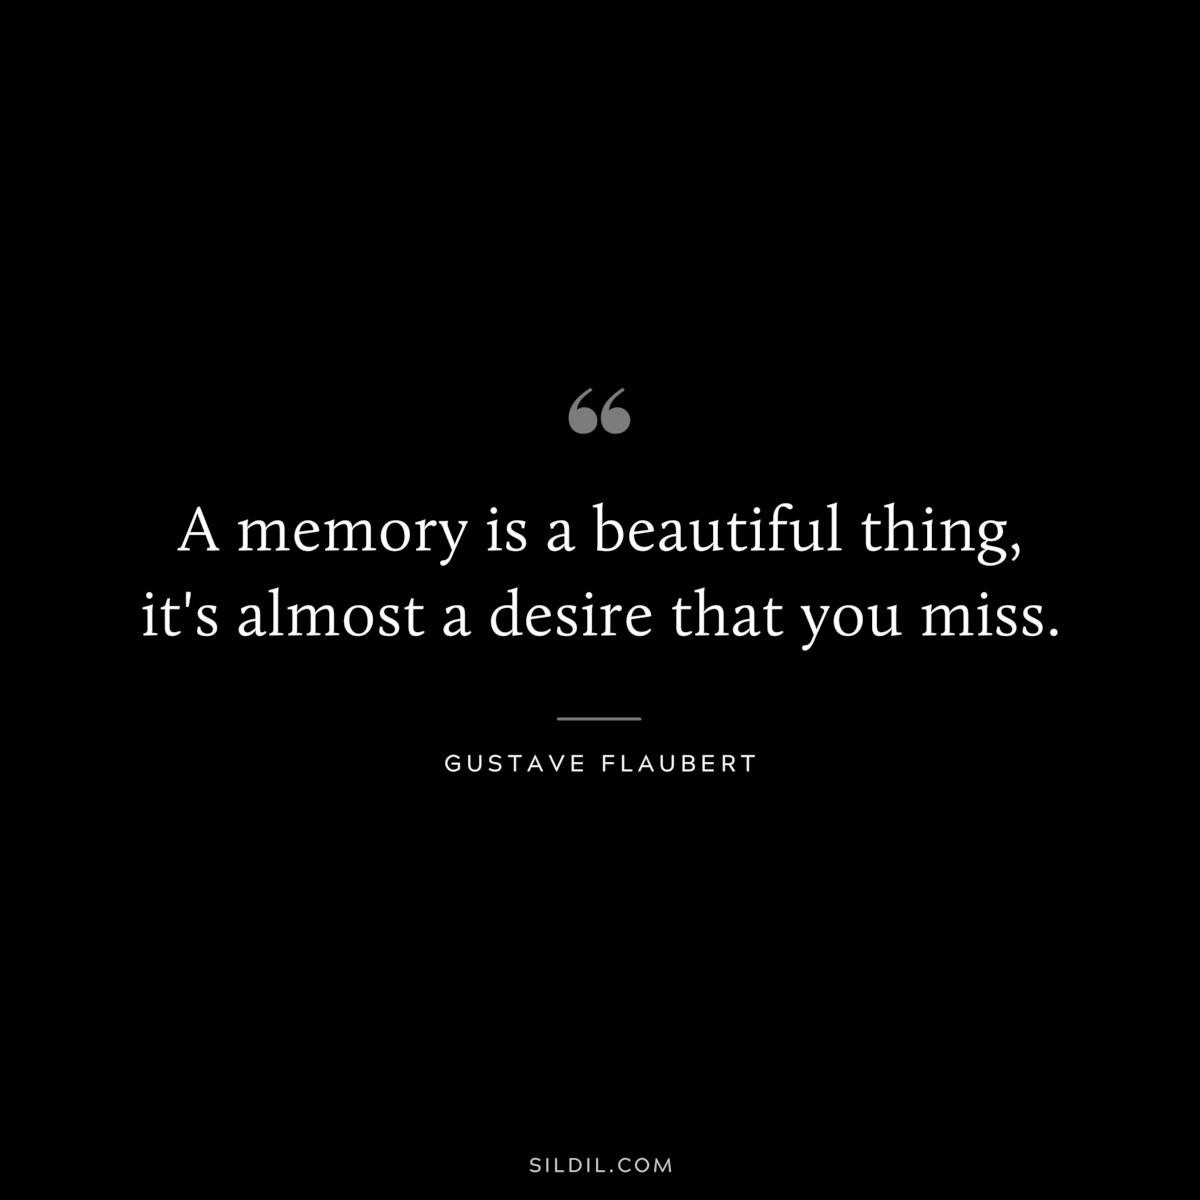 A memory is a beautiful thing, it's almost a desire that you miss. ― Gustave Flaubert